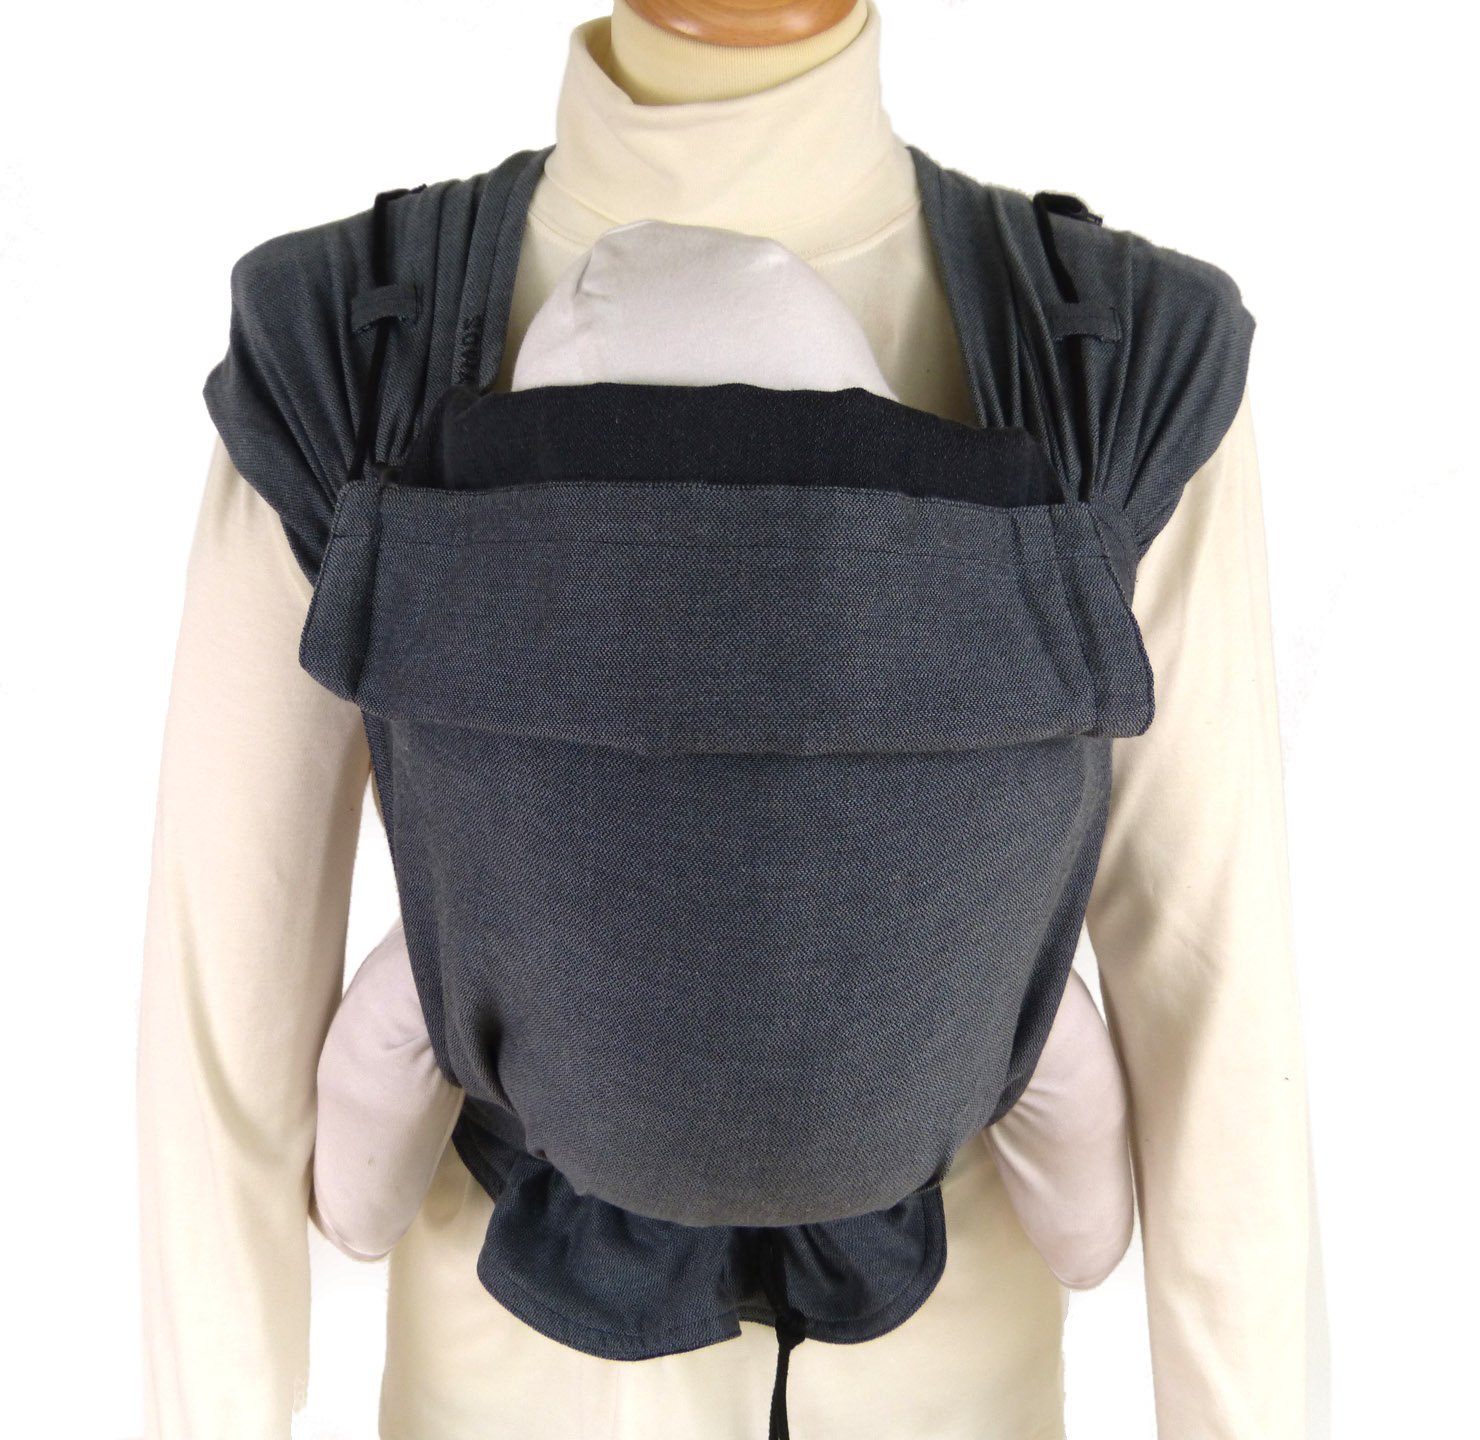 Didymos 34980 Baby Carrier Didy Tai, Model Light Anthracite